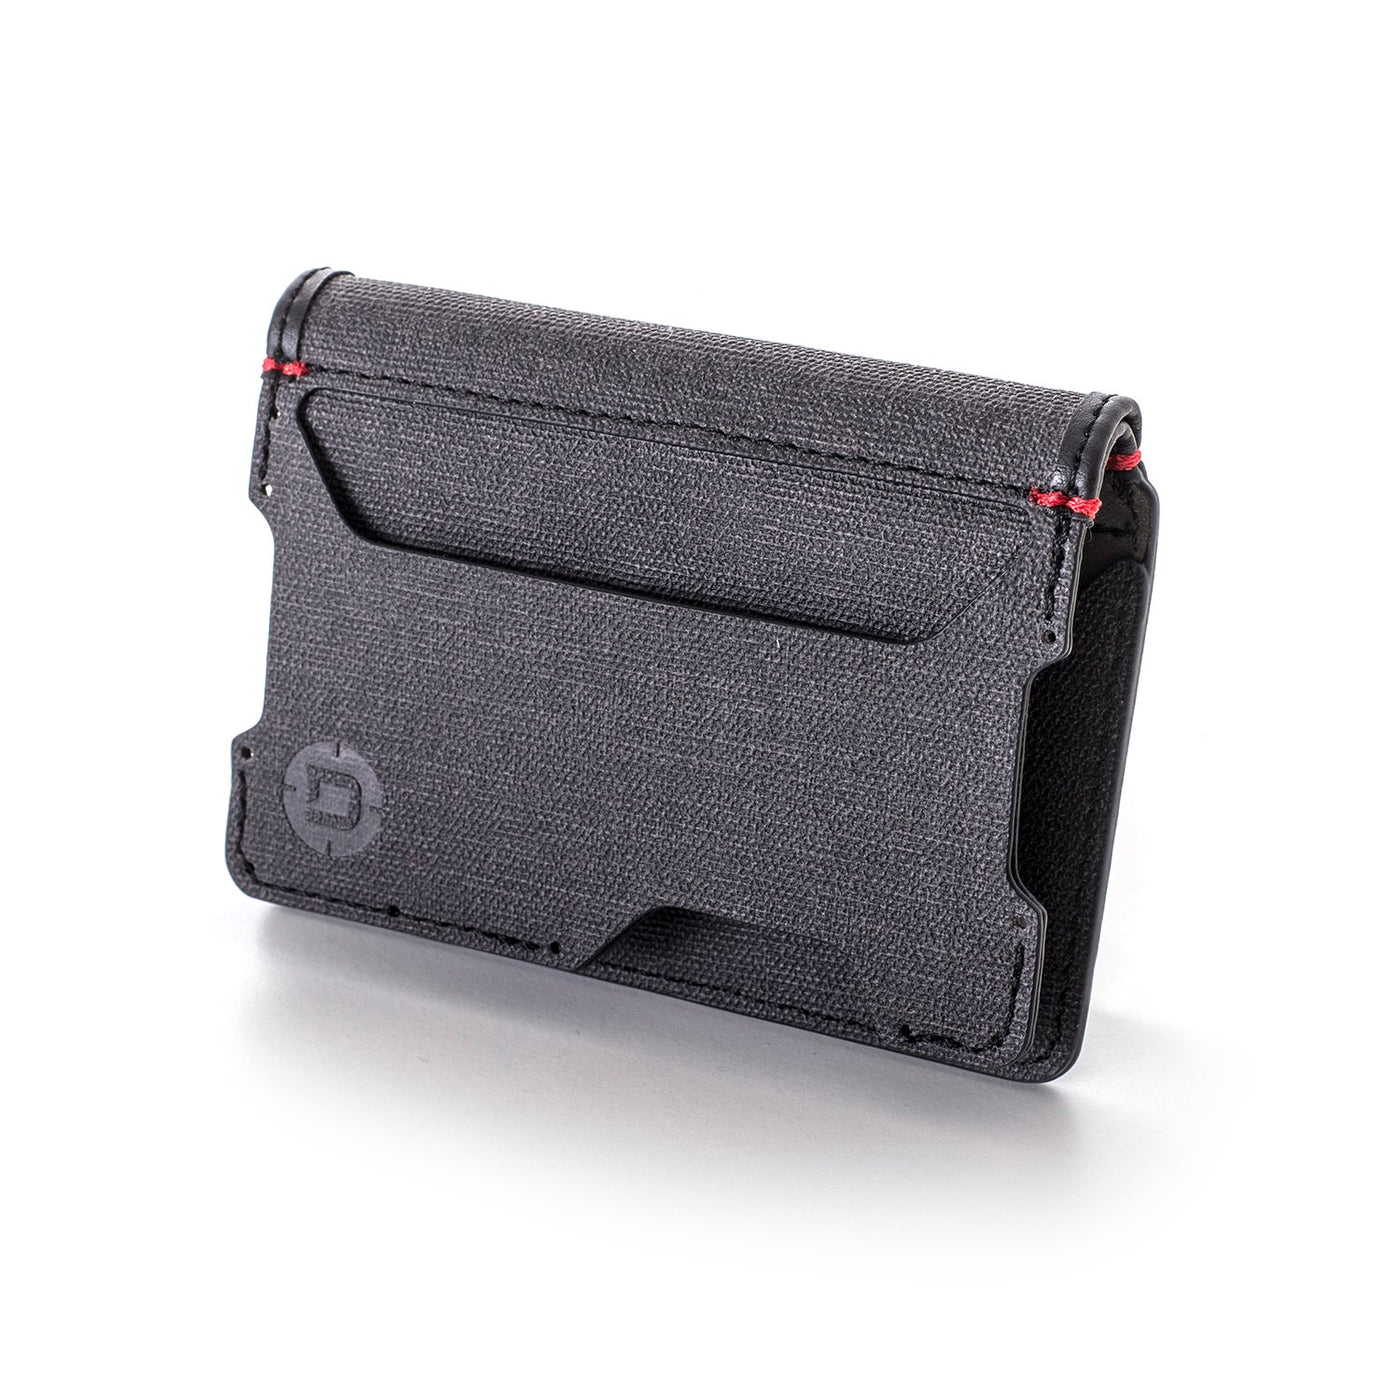 DANGO - D Series Bifold Pocket with Pen Cavity (Pocket Only)